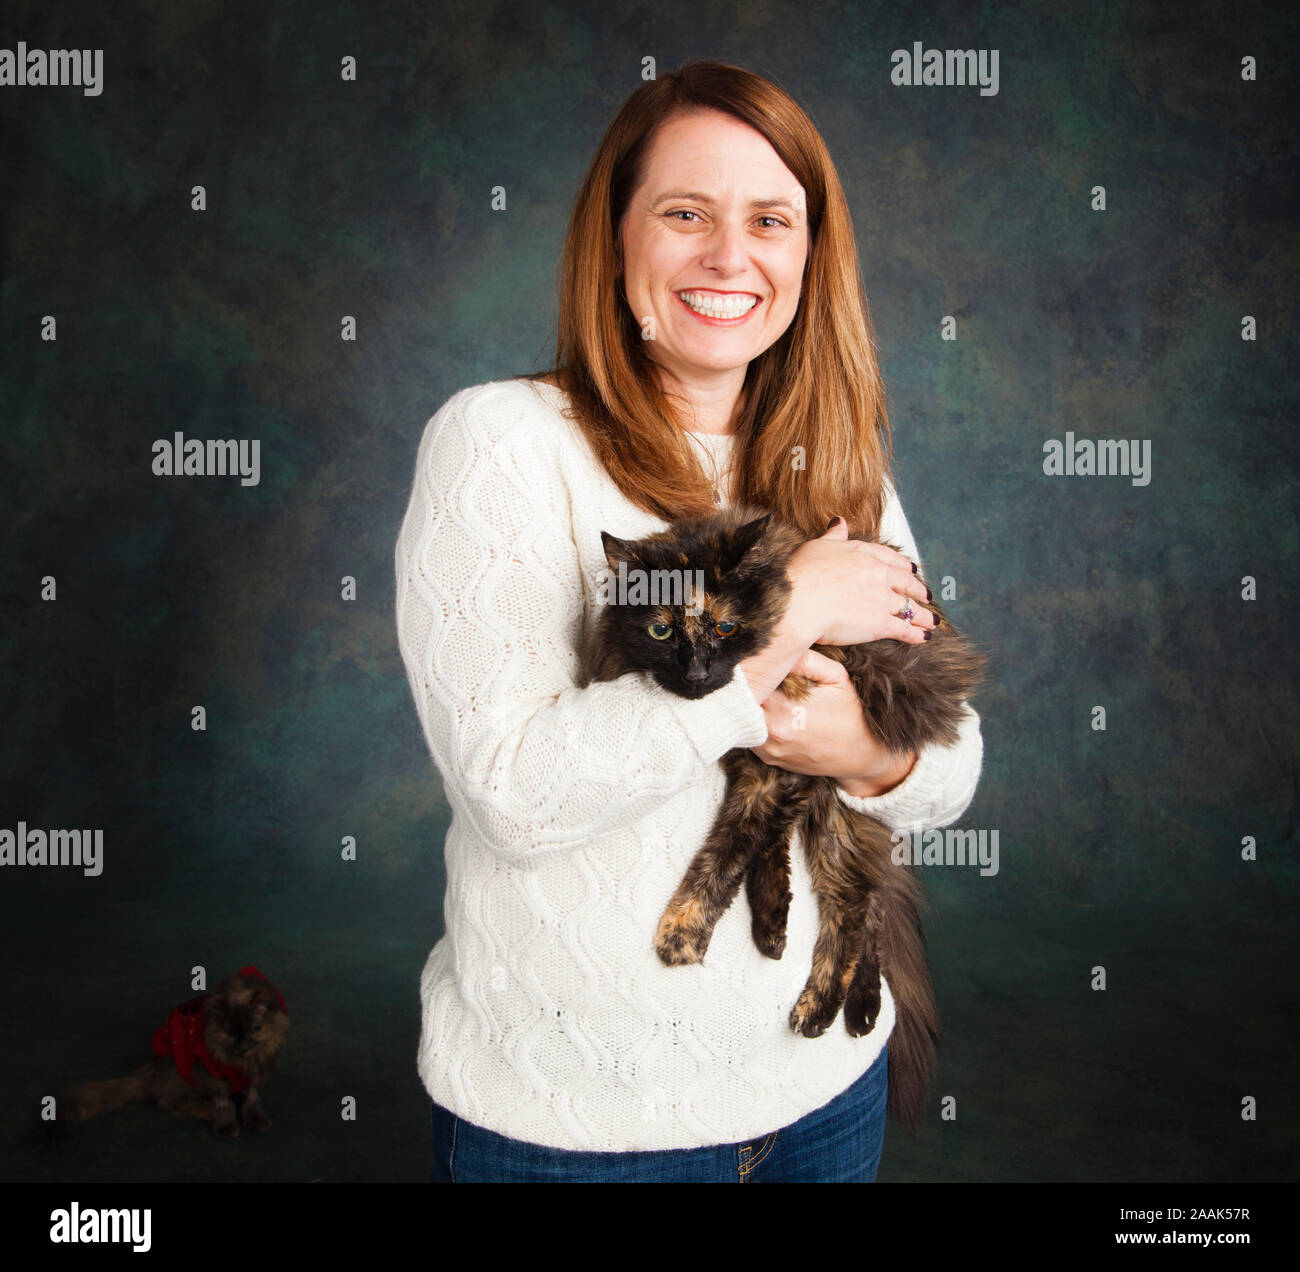 Studio portrait of smiling woman with long haired cat Stock Photo